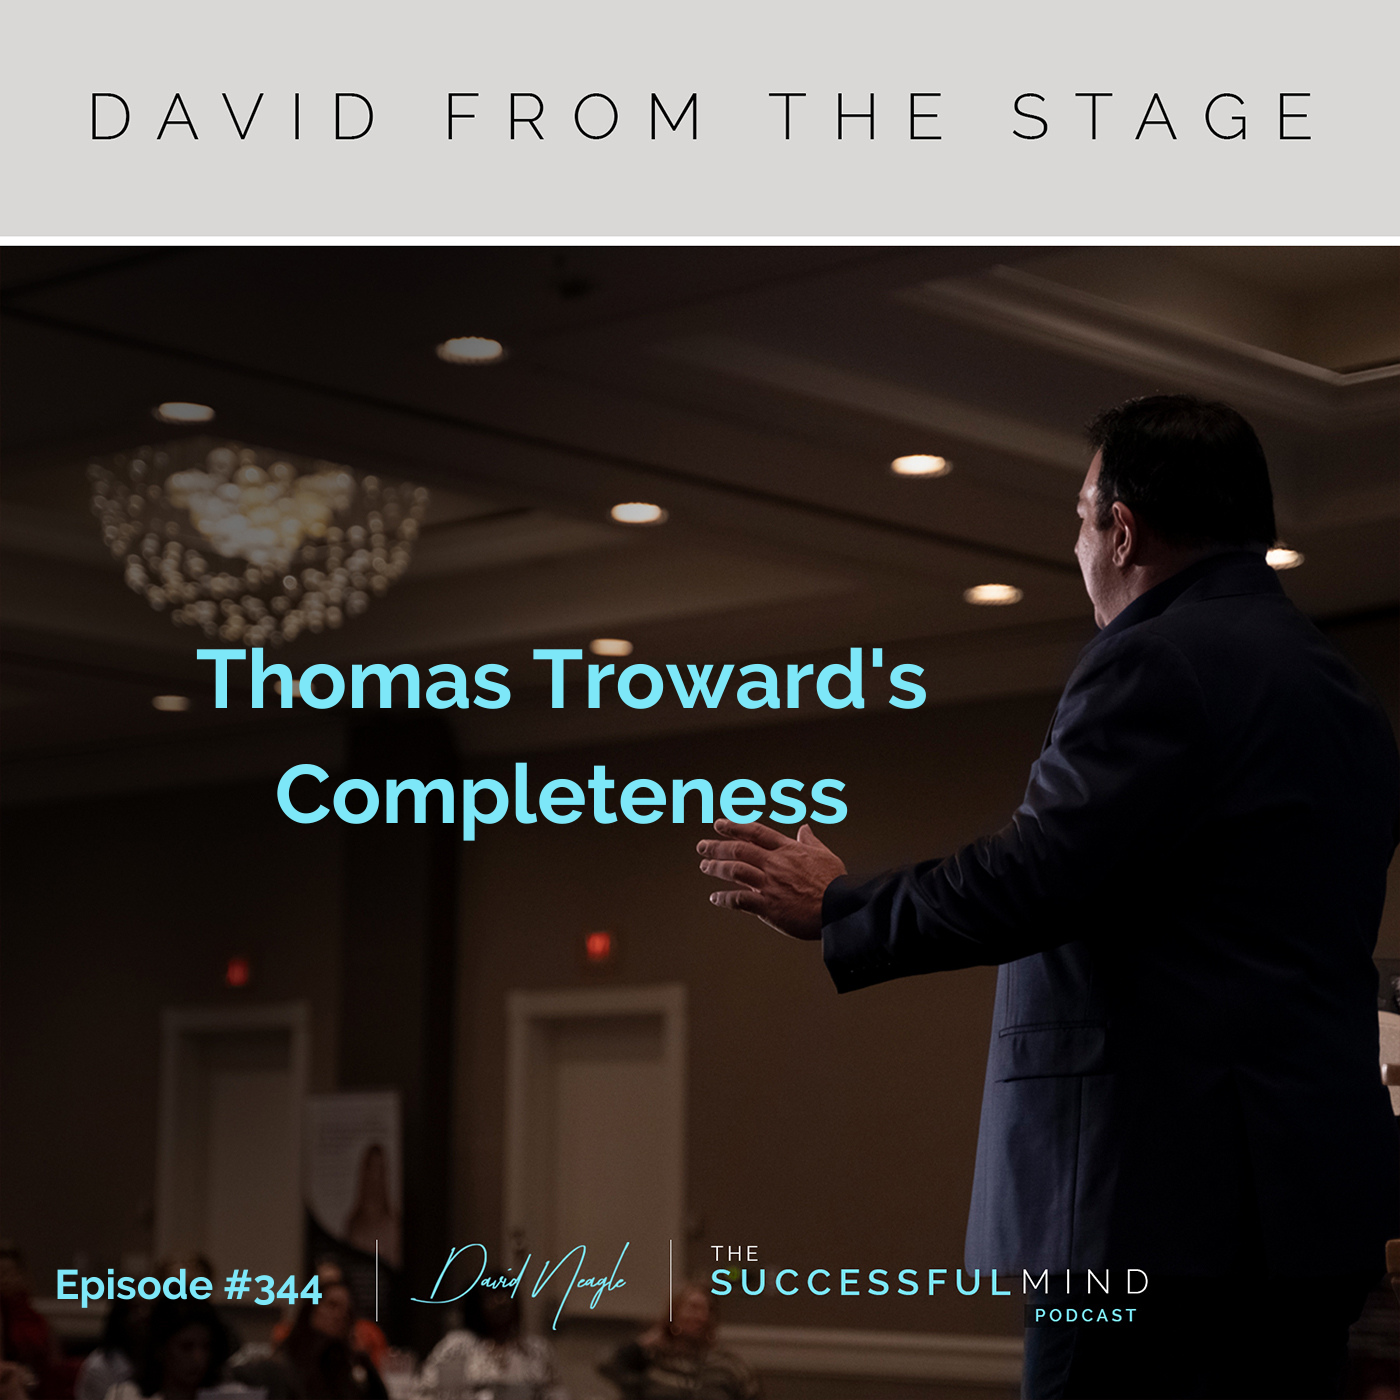 The Successful Mind Podcast - Episode 344 - Thomas Troward's Completeness